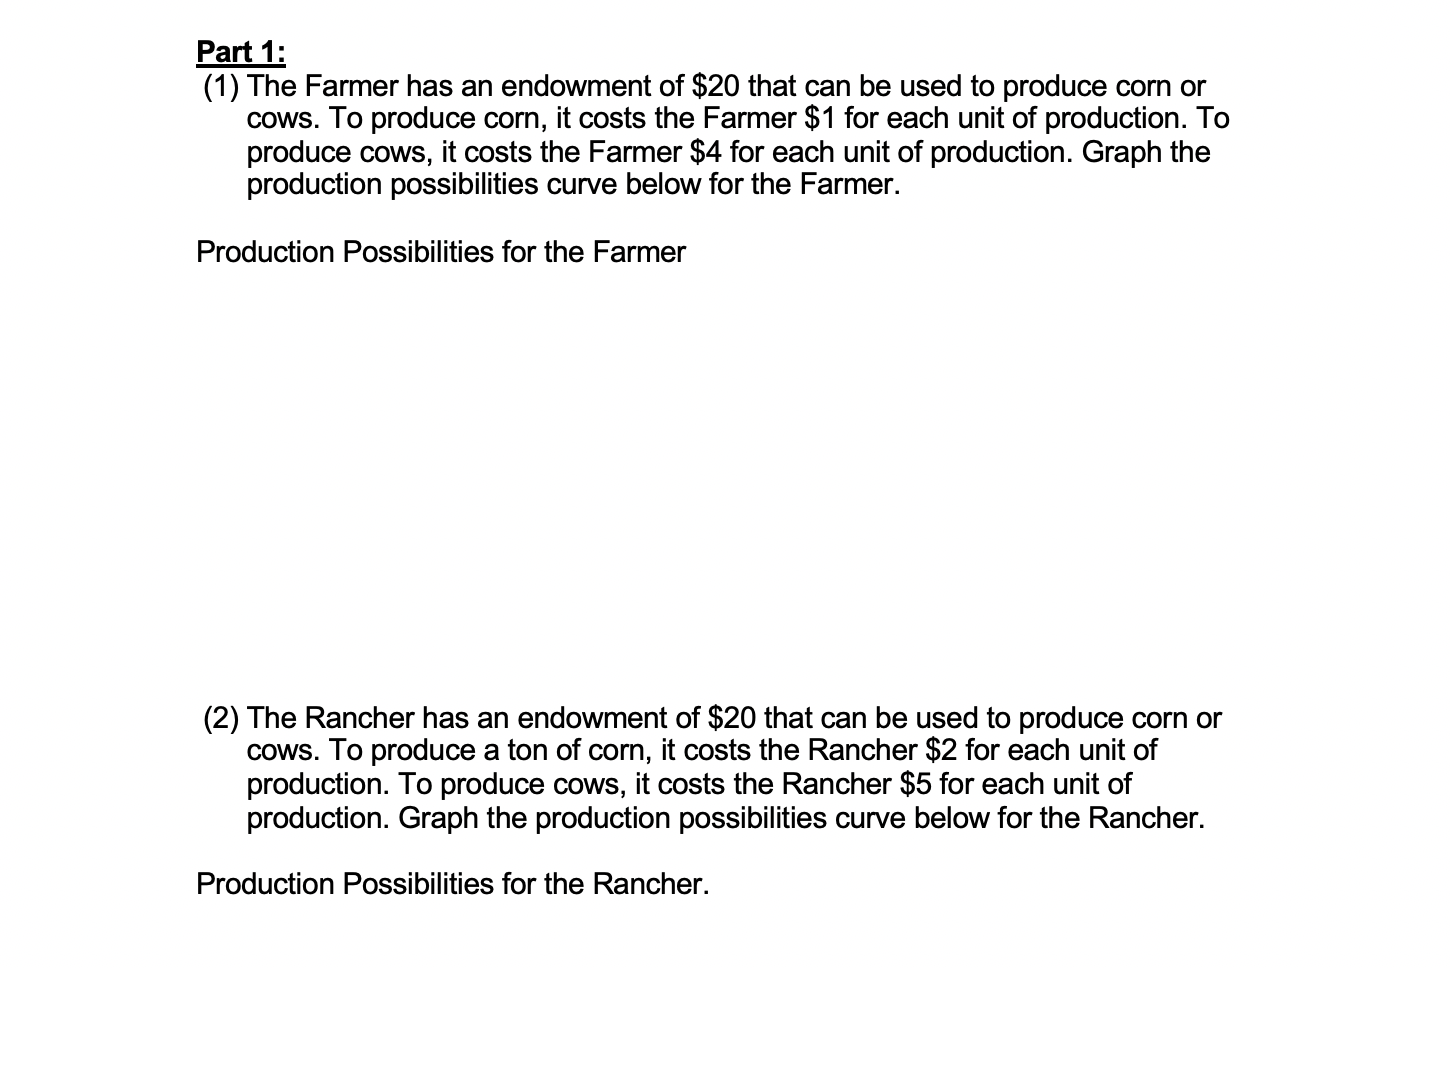 Part 1:
(1) The Farmer has an endowment of $20 that can be used to produce corn or
cows. To produce corn, it costs the Farmer $1 for each unit of production. To
produce cows, it costs the Farmer $4 for each unit of production. Graph the
production possibilities curve below for the Farmer.
Production Possibilities for the Farmer
(2) The Rancher has an endowment of $20 that can be used to produce corn or
cows. To produce a ton of corn, it costs the Rancher $2 for each unit of
production. To produce cows, it costs the Rancher $5 for each unit of
production. Graph the production possibilities curve below for the Rancher.
Production Possibilities for the Rancher.
